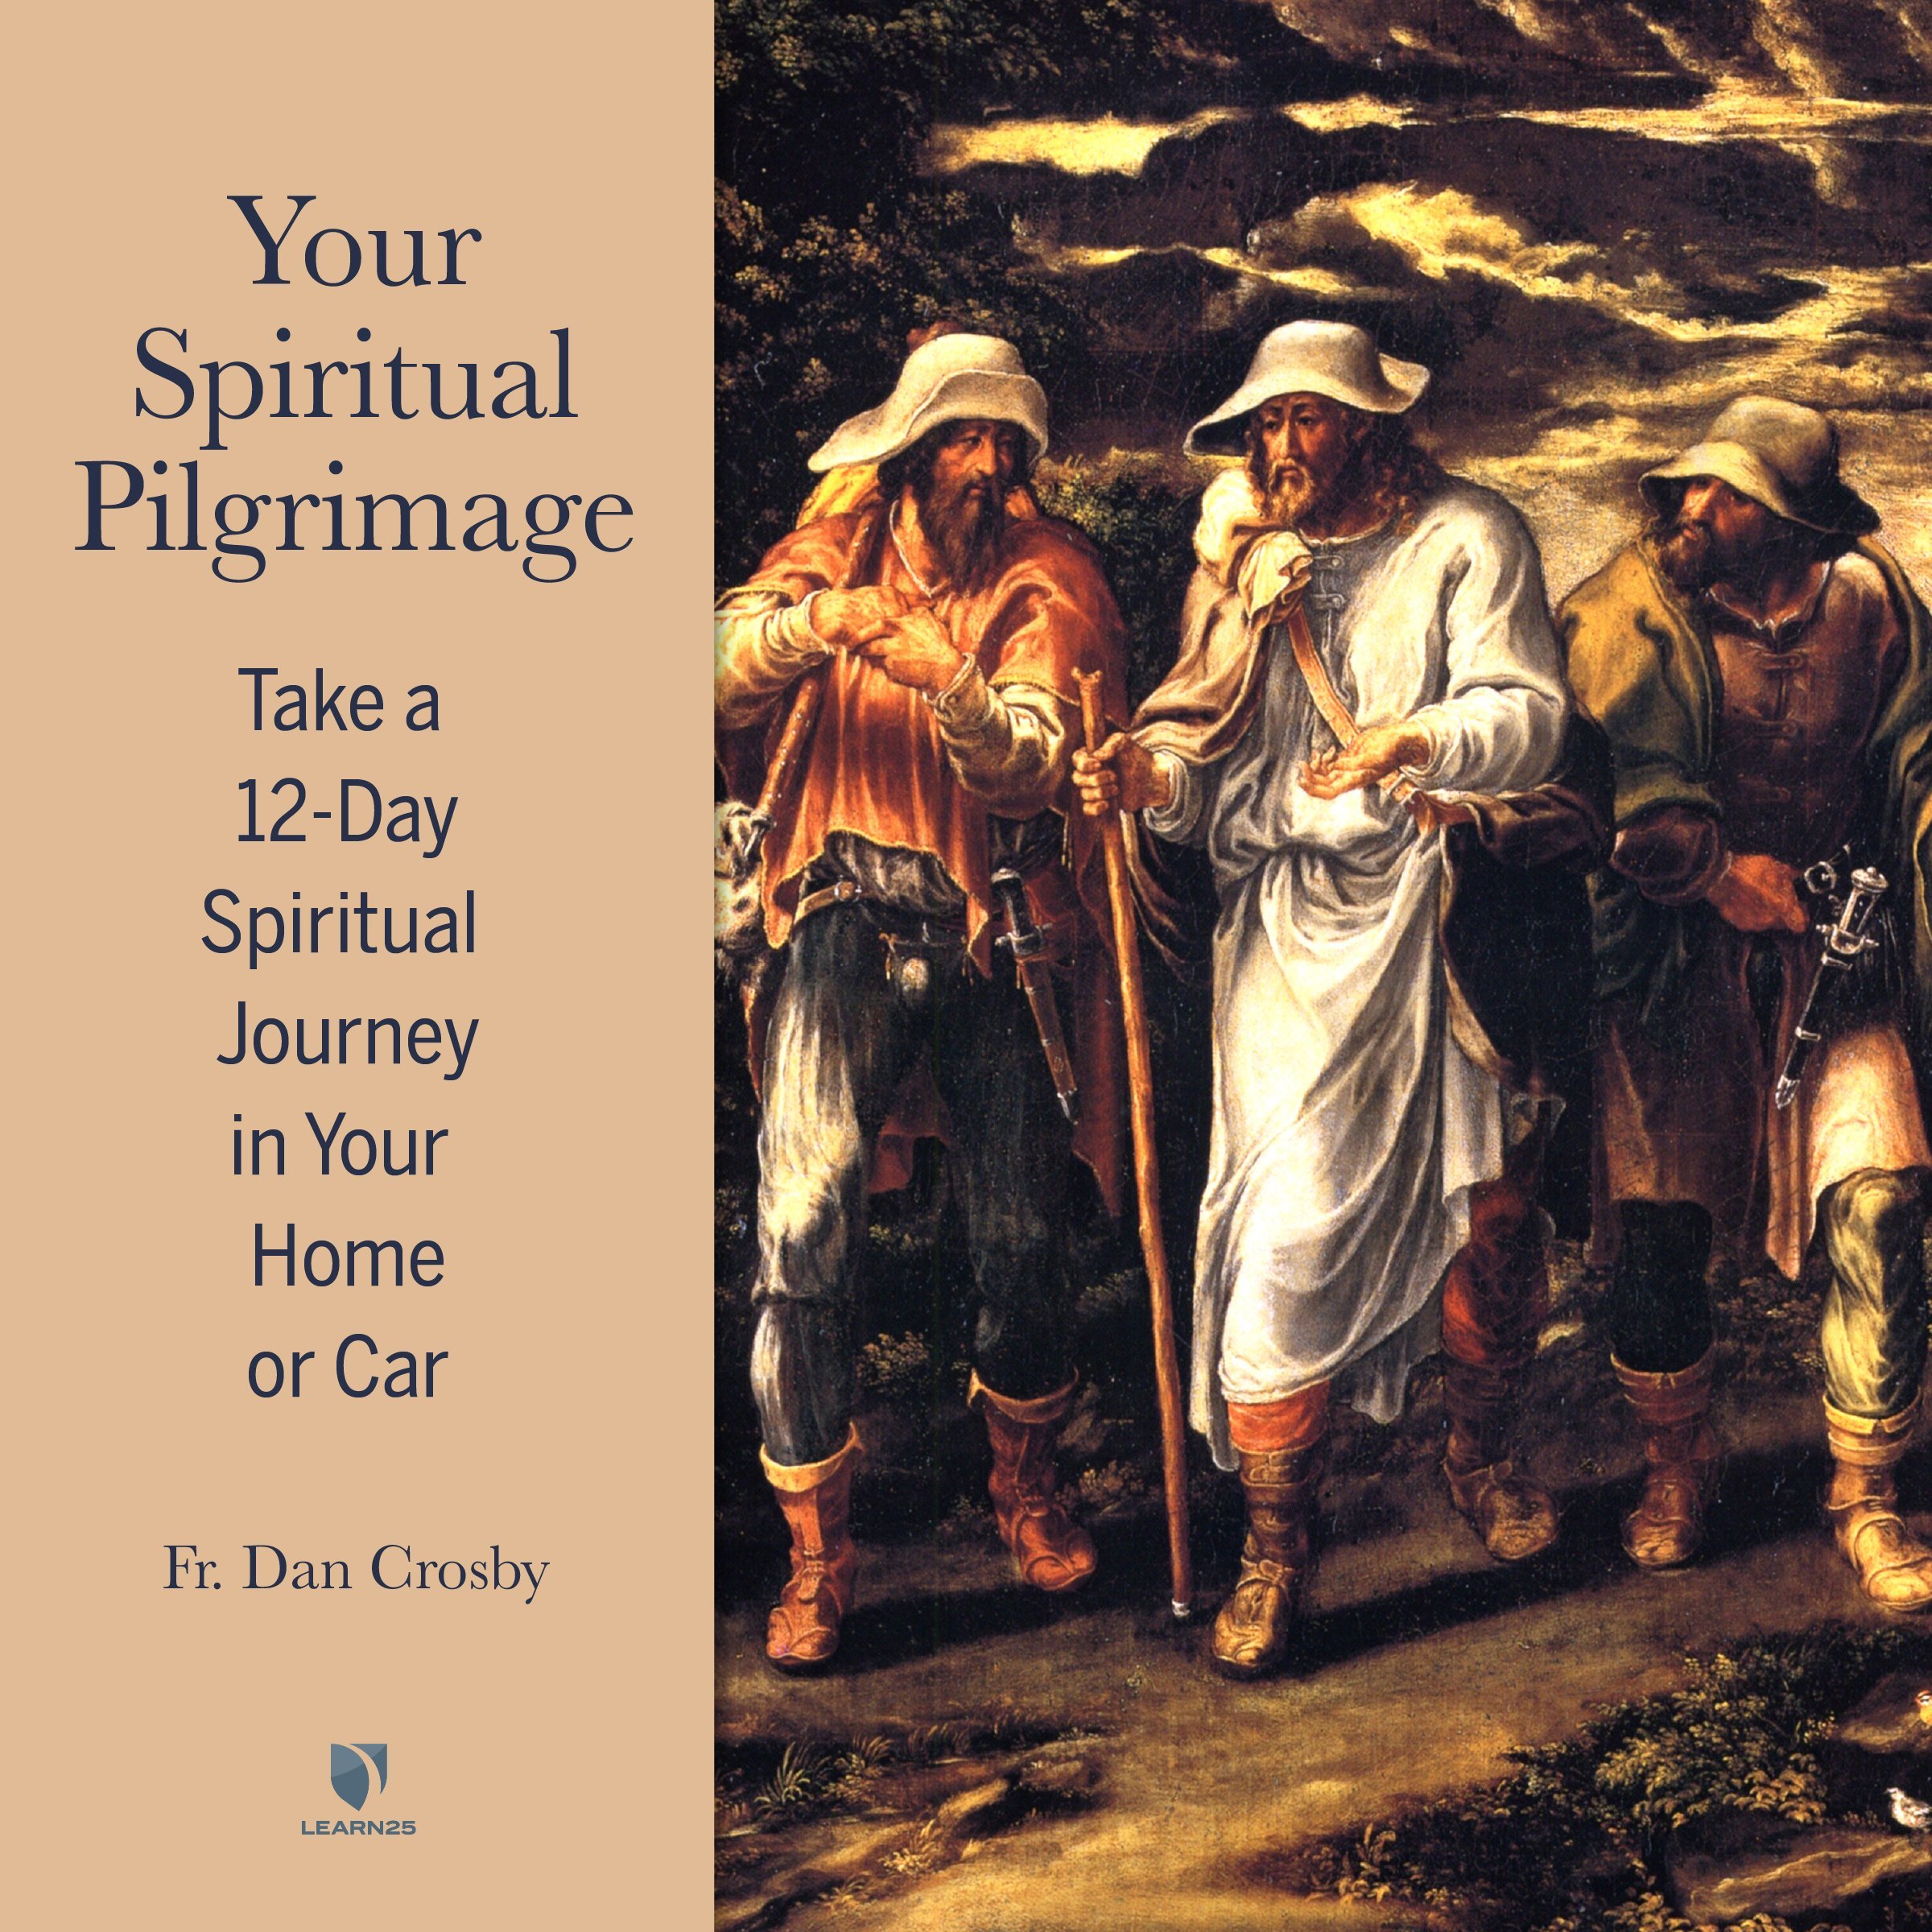 Your Spiritual Pilgrimage Take A 12 Day Spiritual Journey In Your Home Or Car Learn25